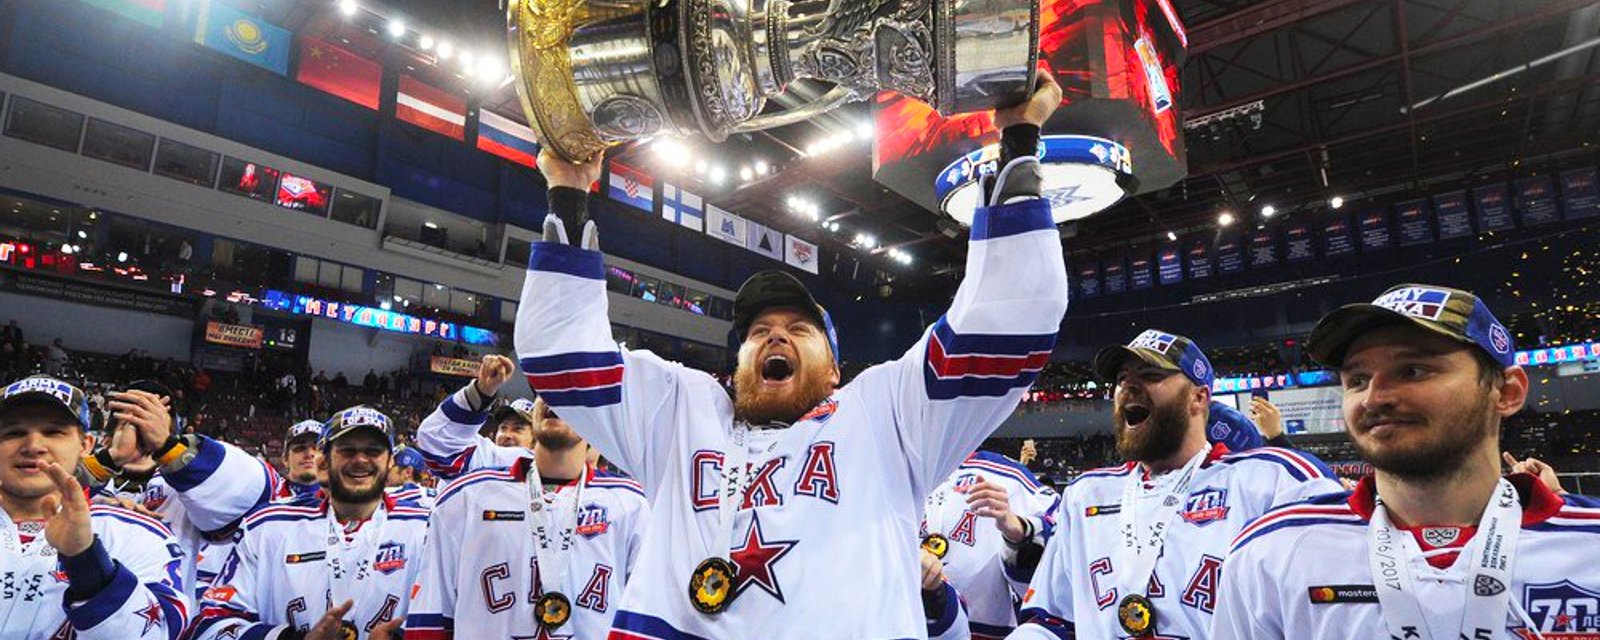 KHL announces there will be no Gagarin Cup champion in 2020